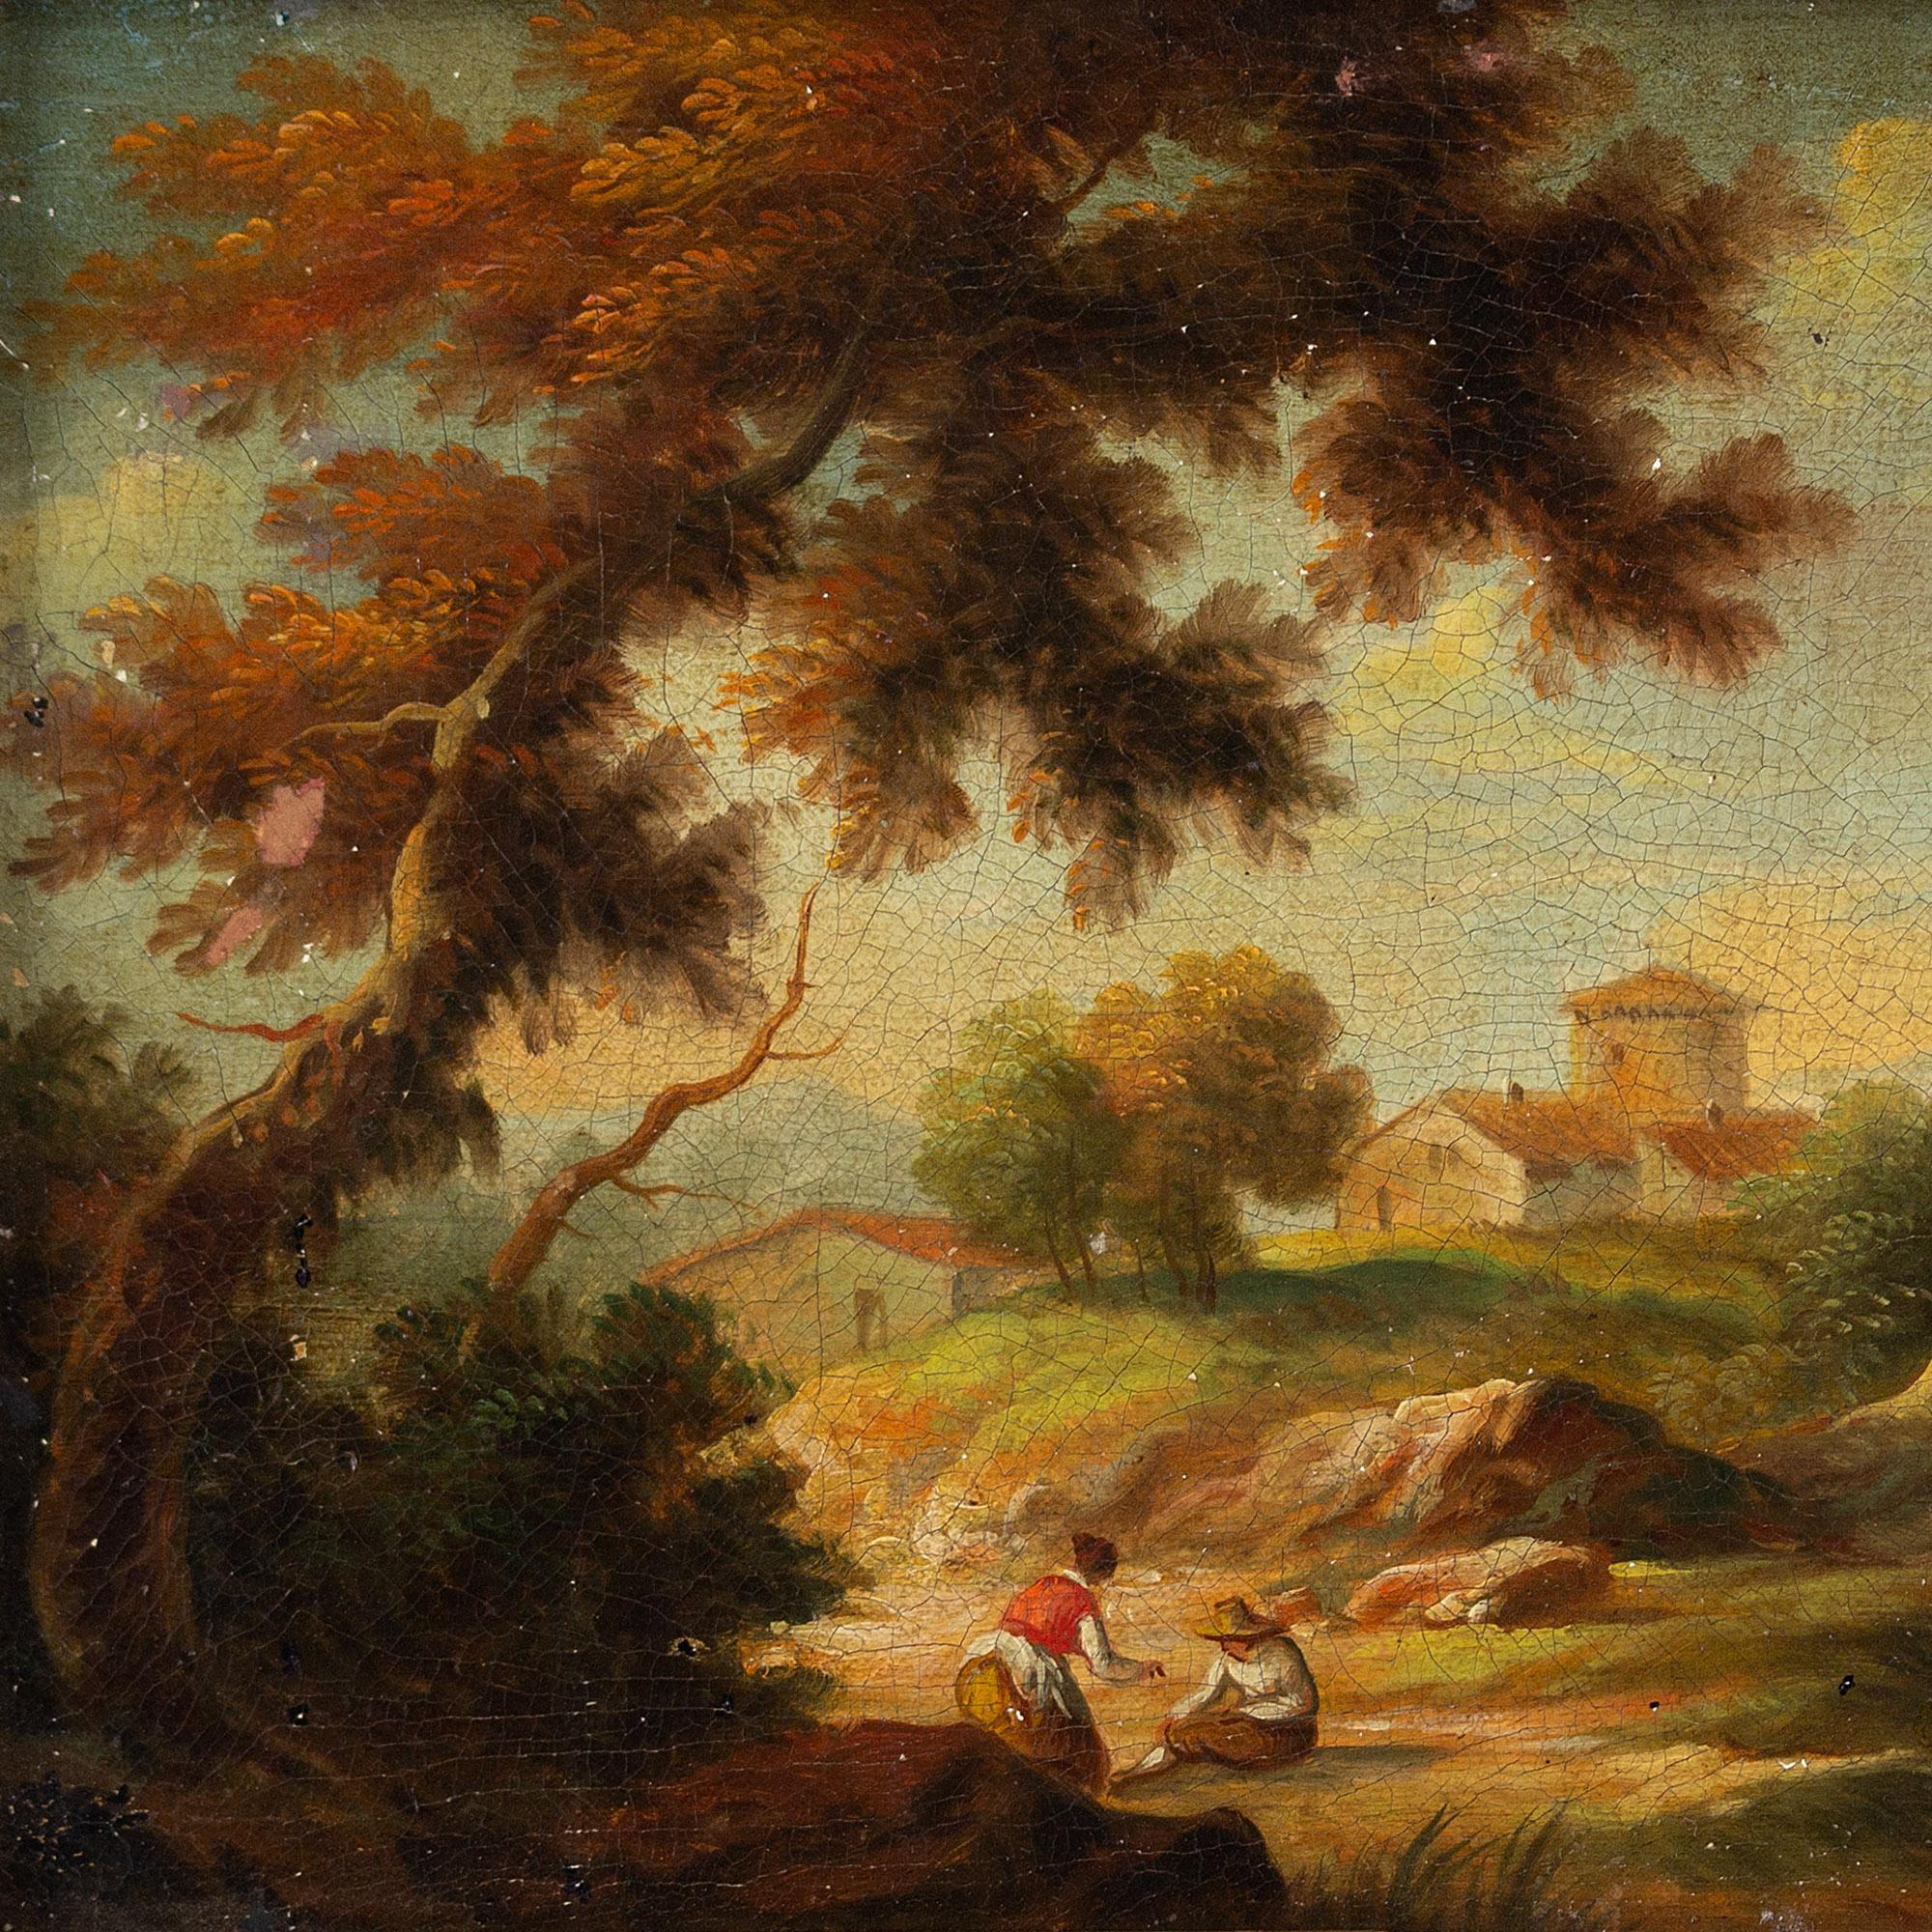 This beautiful 18th-century landscape painting depicts a glorious view across a mountainous region of Italy. The light is exquisite and typically Mediterranean - it’s the environment sought out by travelling artists. A sunlit haven on a gentleman’s